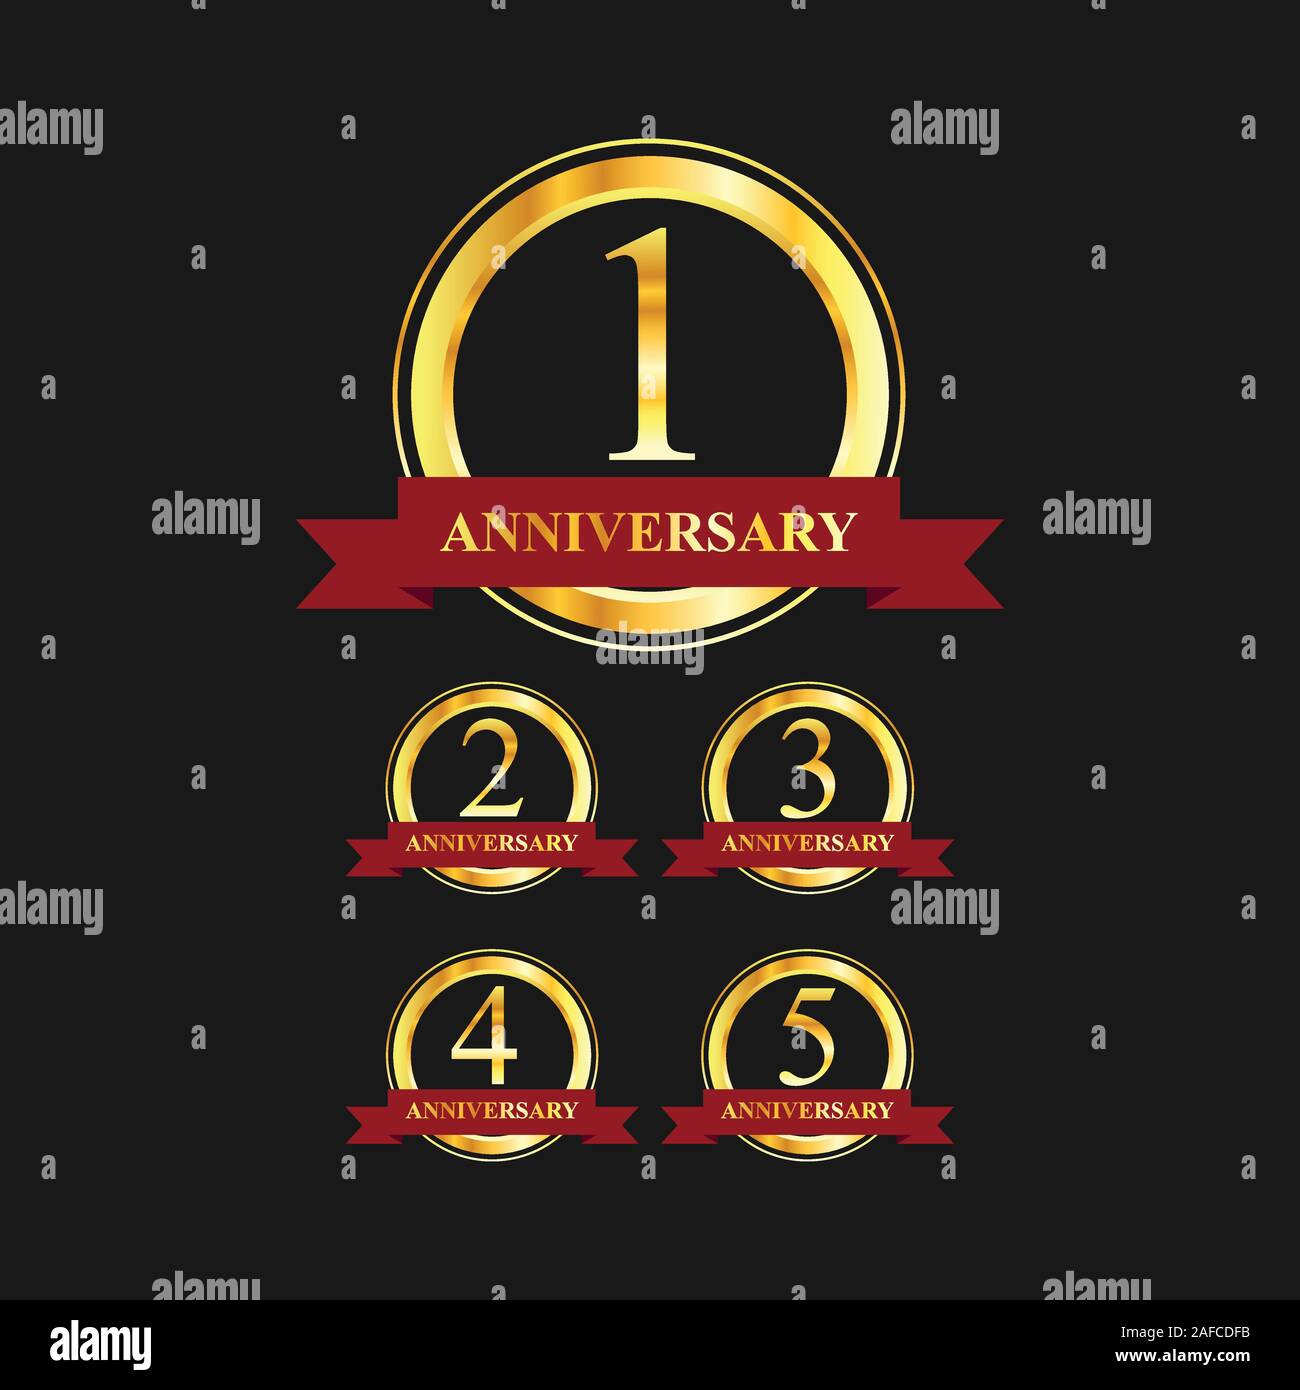 1 to 5 year anniversary gold label vector image. Golden anniversary label vector logo design set Stock Vector